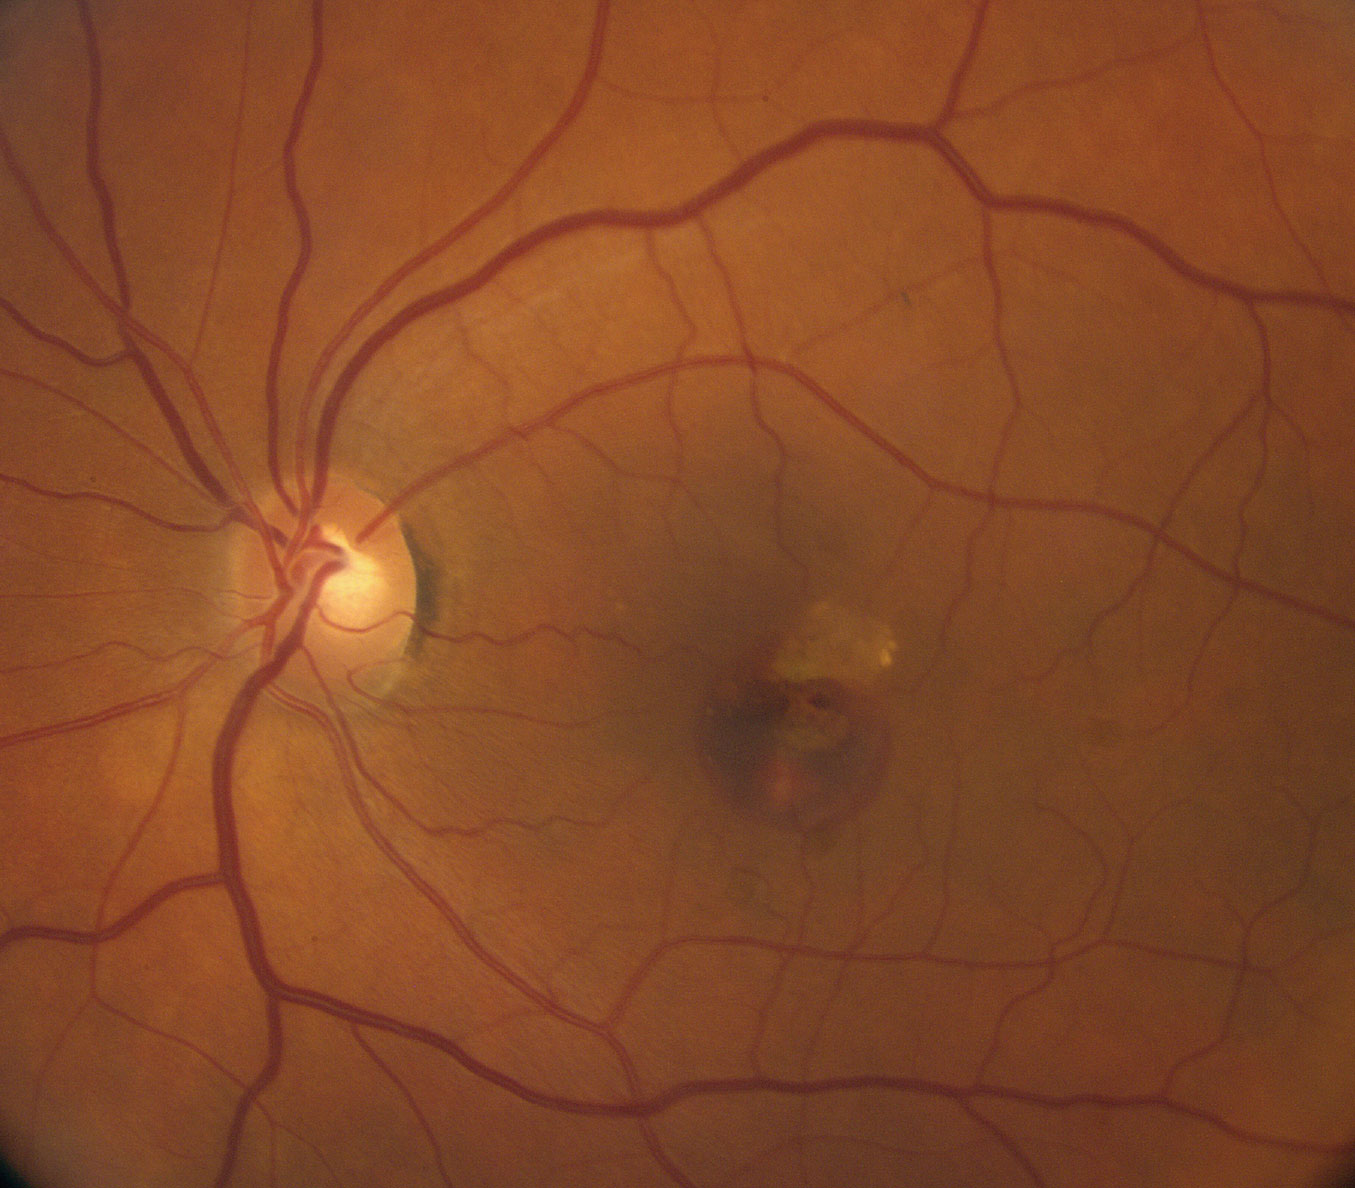 This fundus photo shows our patient’s left eye. How do you account for the hemorrhage?